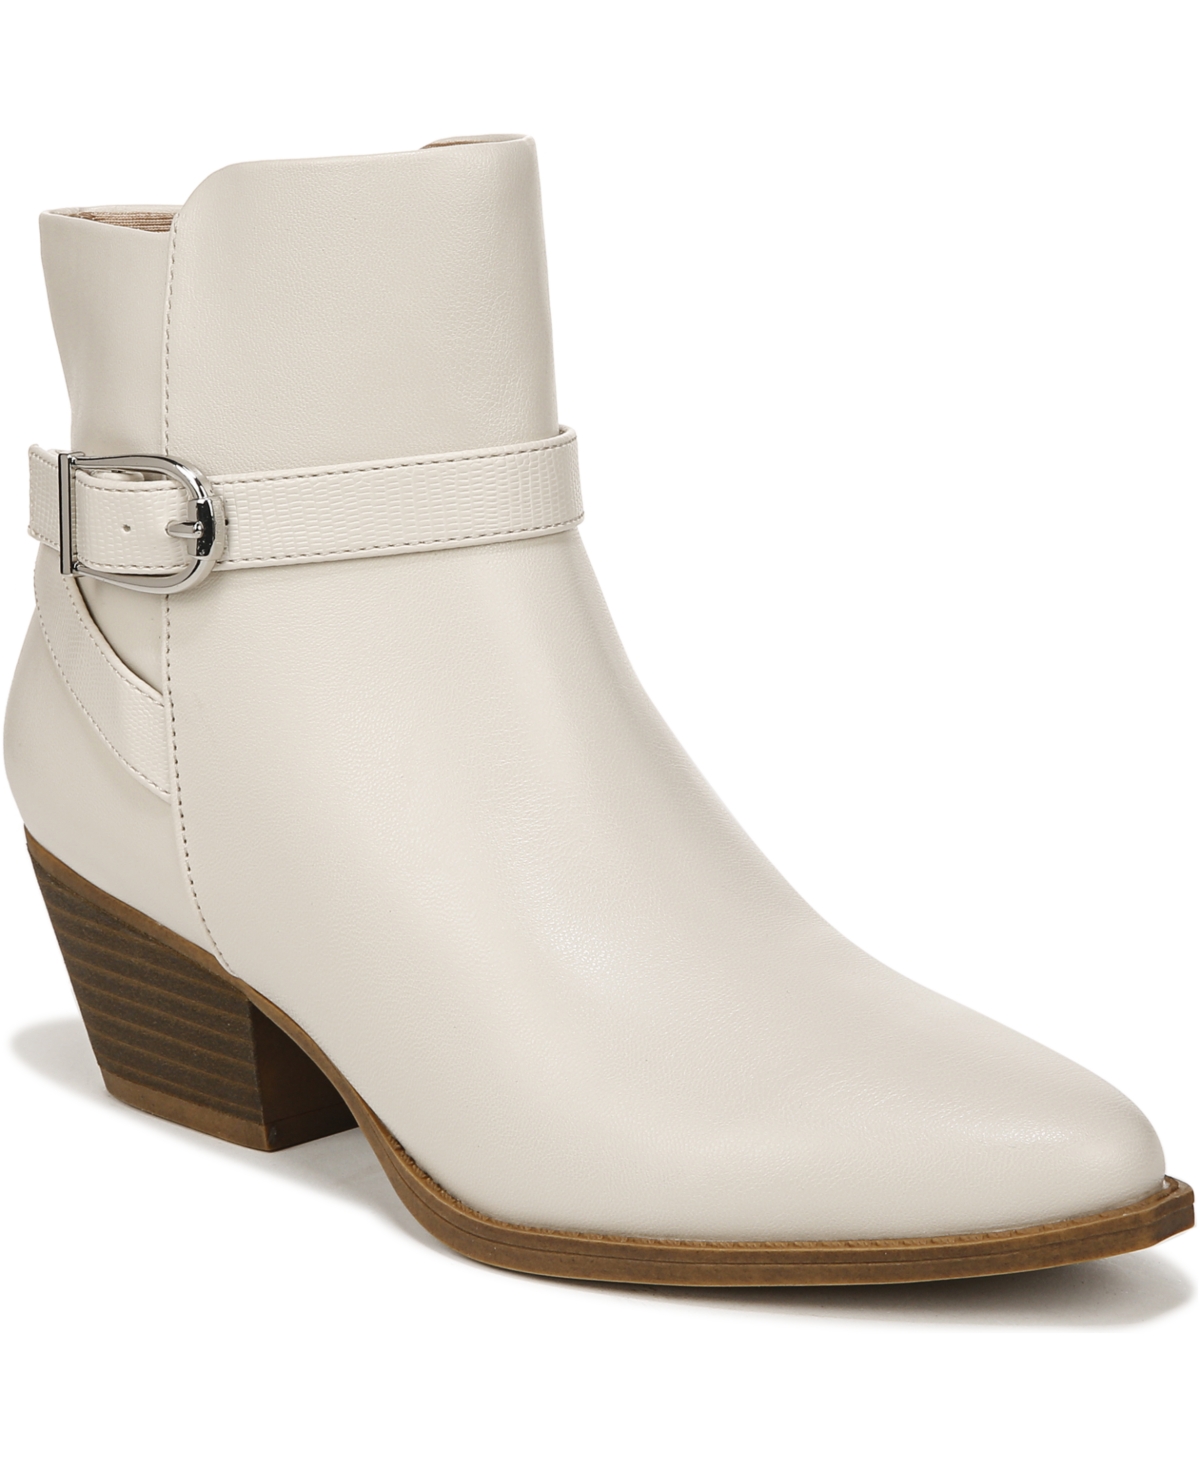 Roxanne Booties - Bone White Faux Leather